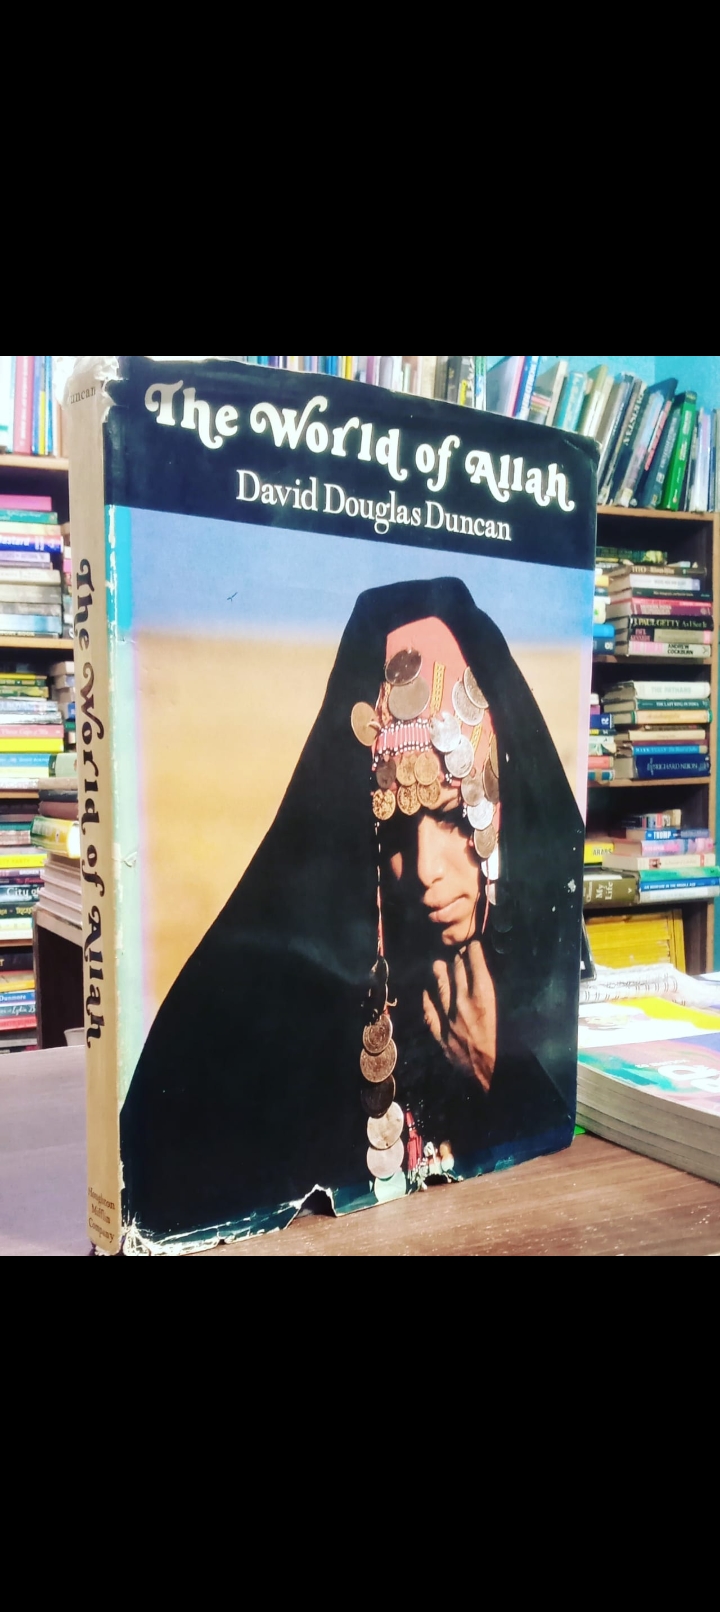 the world of allah by david douglas duncan. large size original hardcover